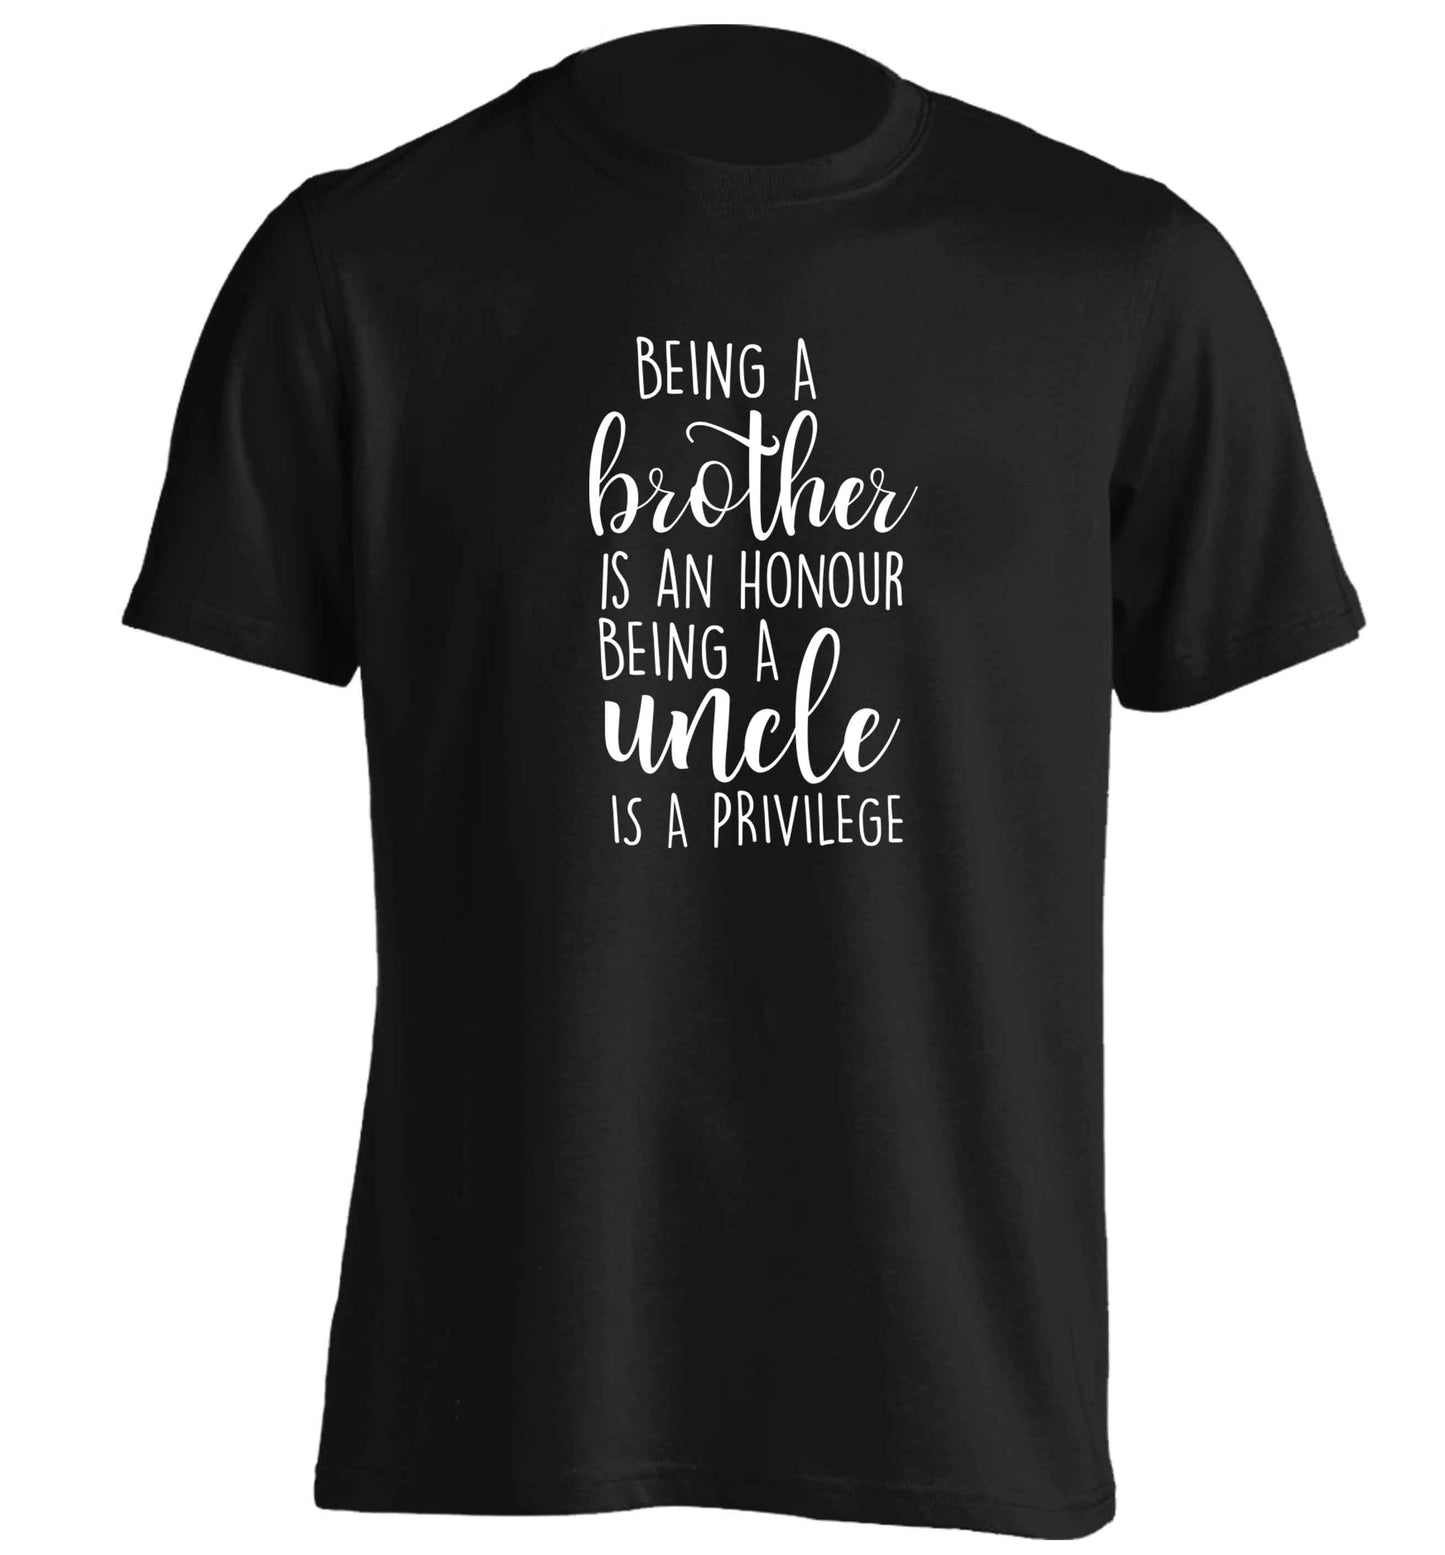 Being a brother is an honour being an uncle is a privilege adults unisex black Tshirt 2XL